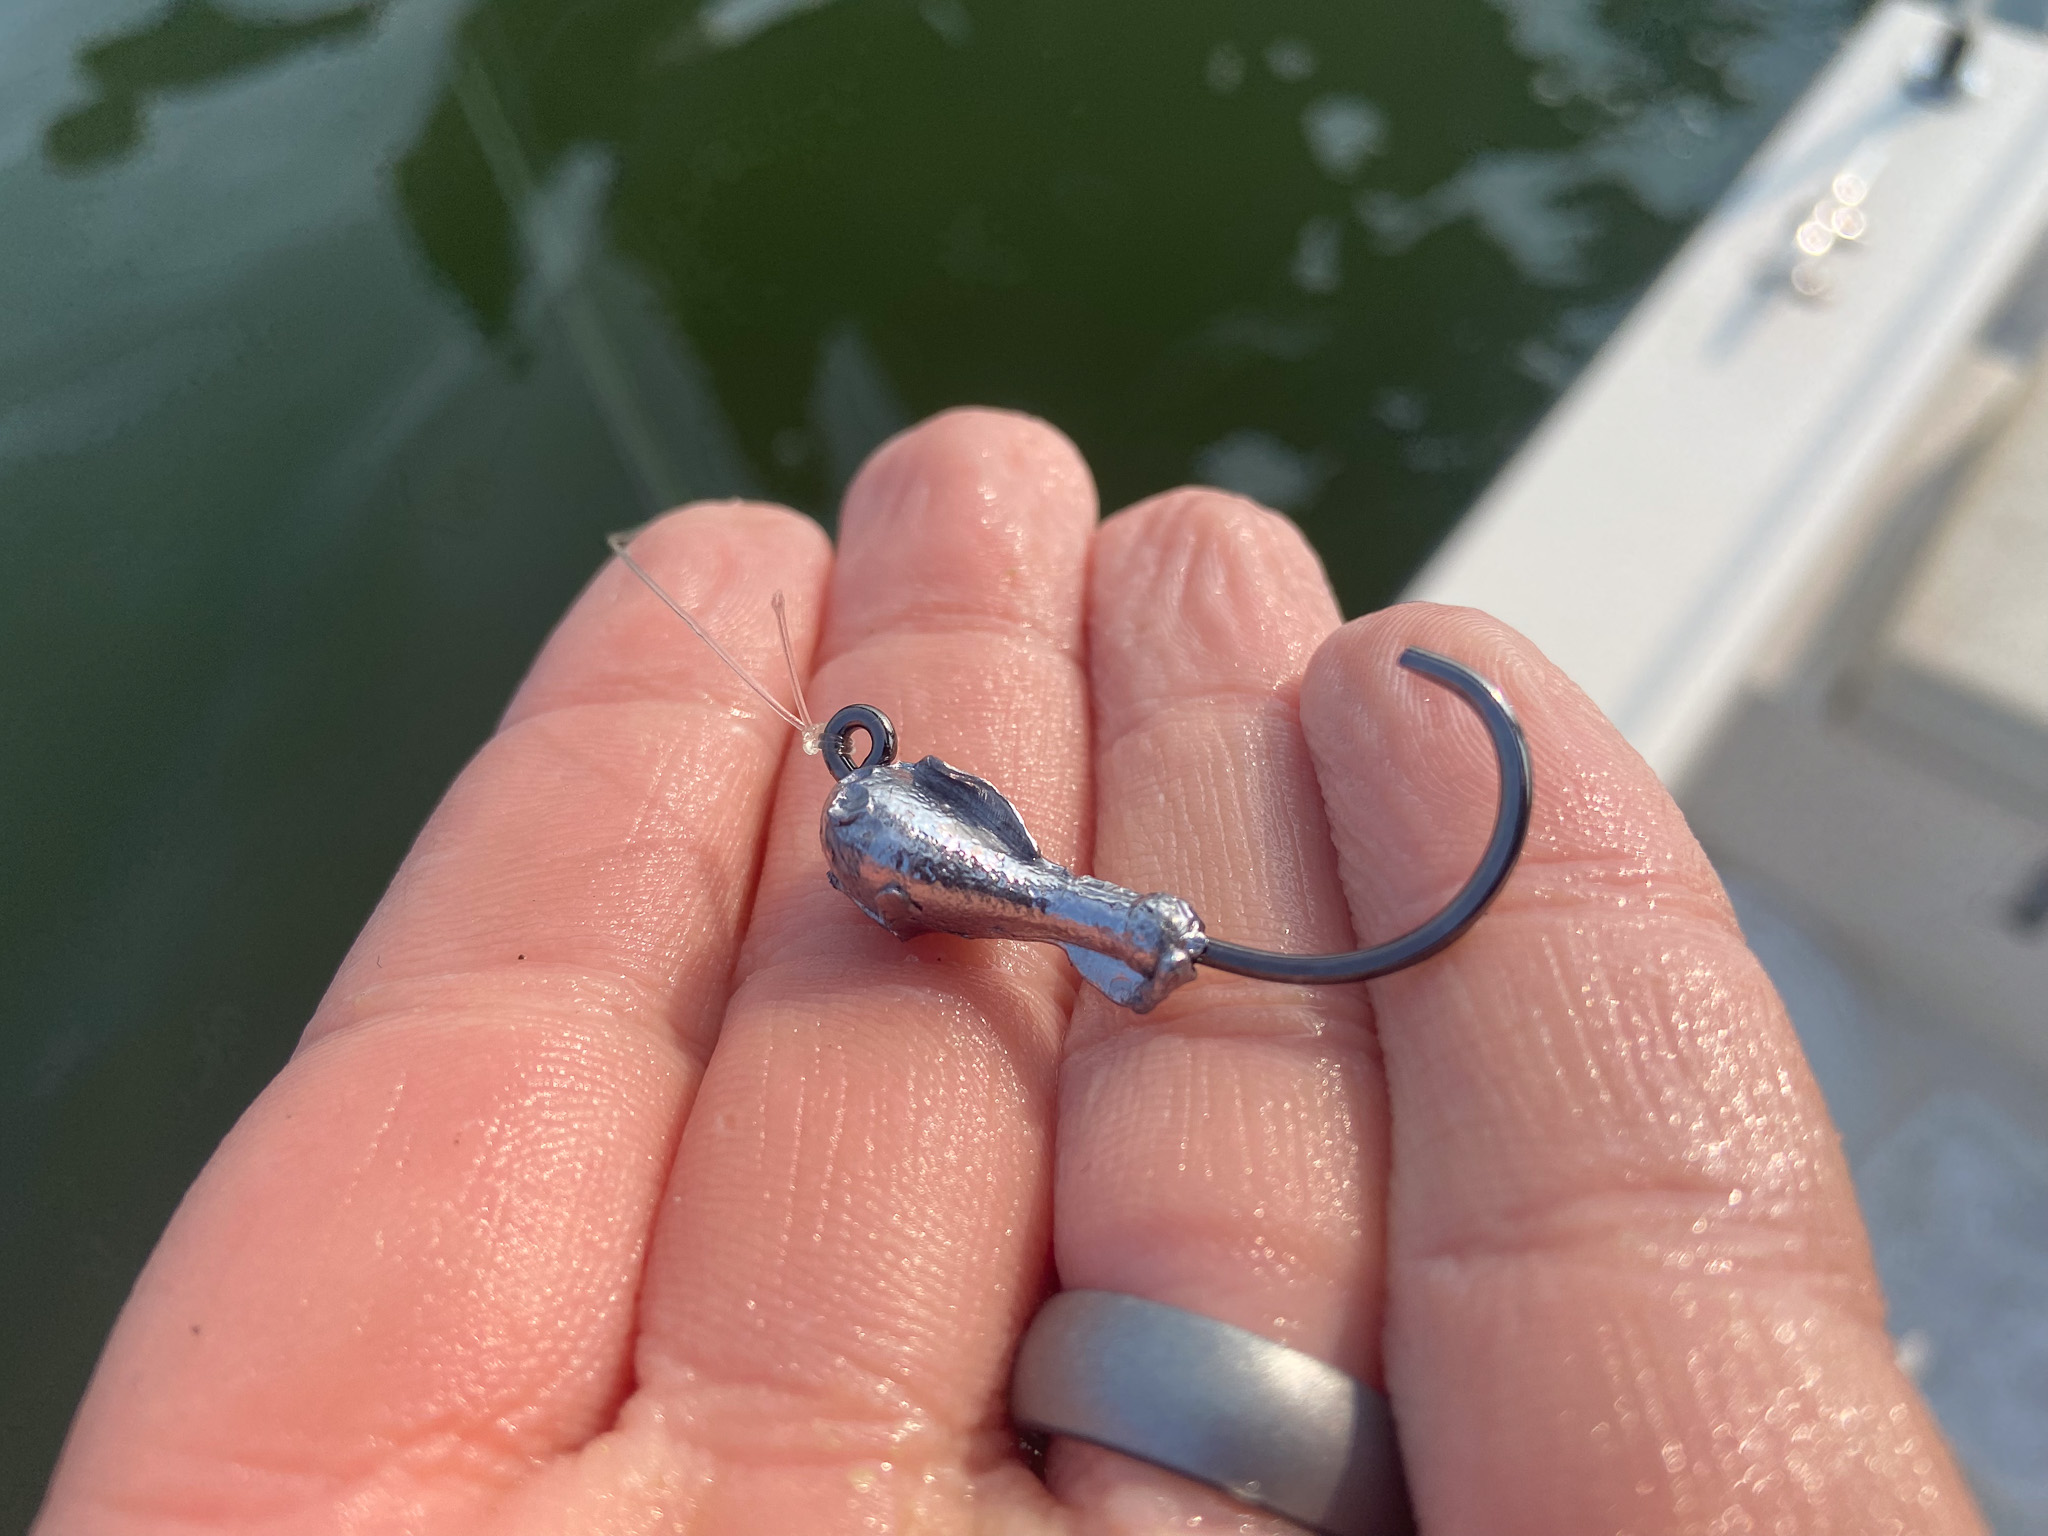 A hook snapped in half from the bite of a sheepshead.